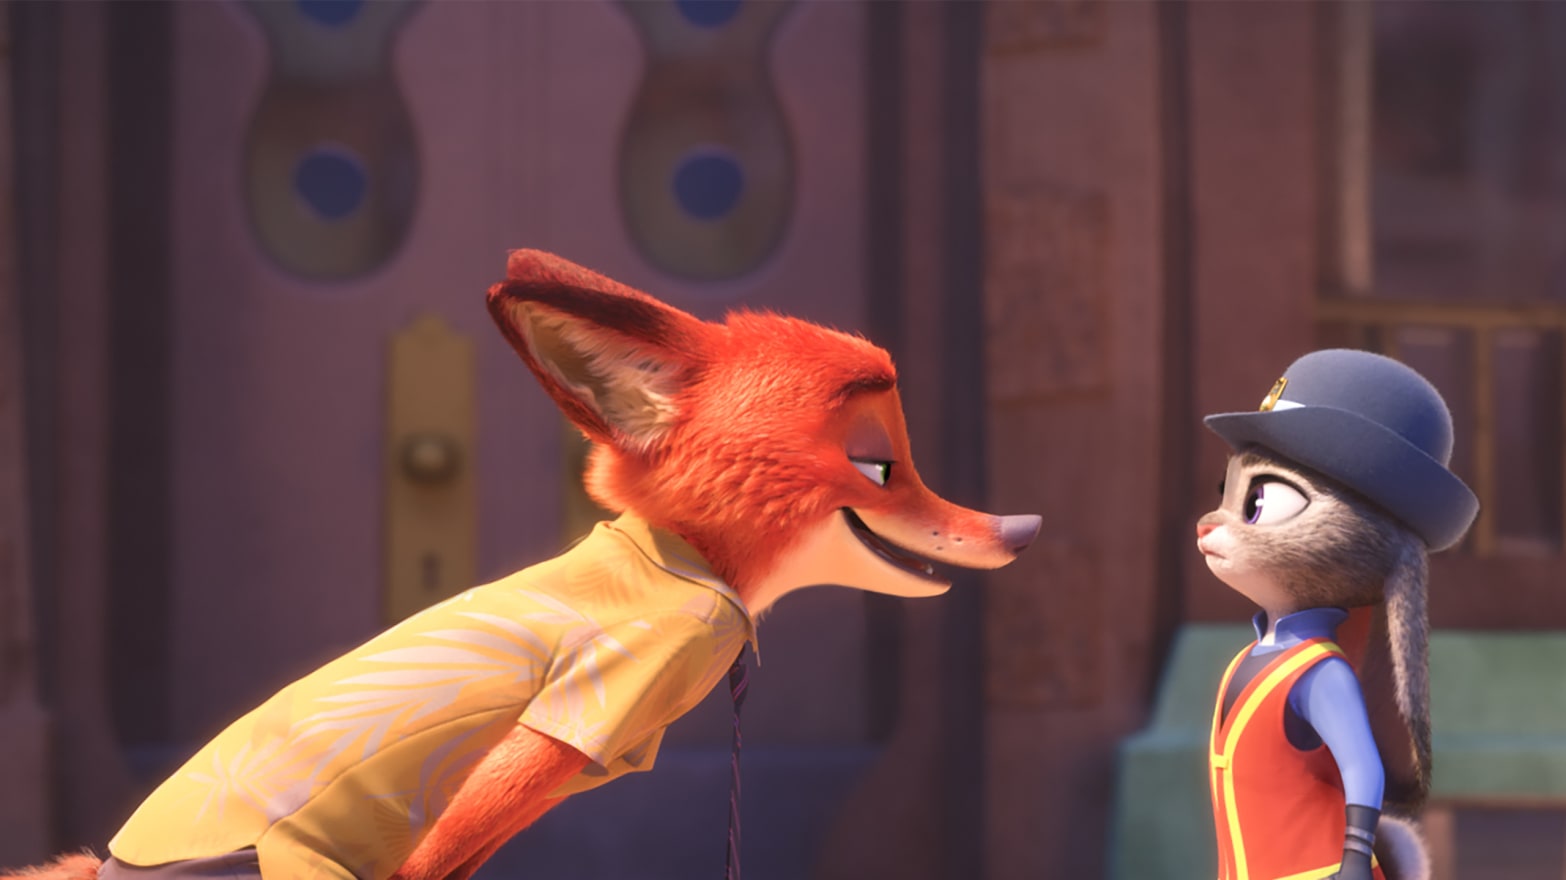 Disney Has Made A Talking Animal Movie About Racial Biases